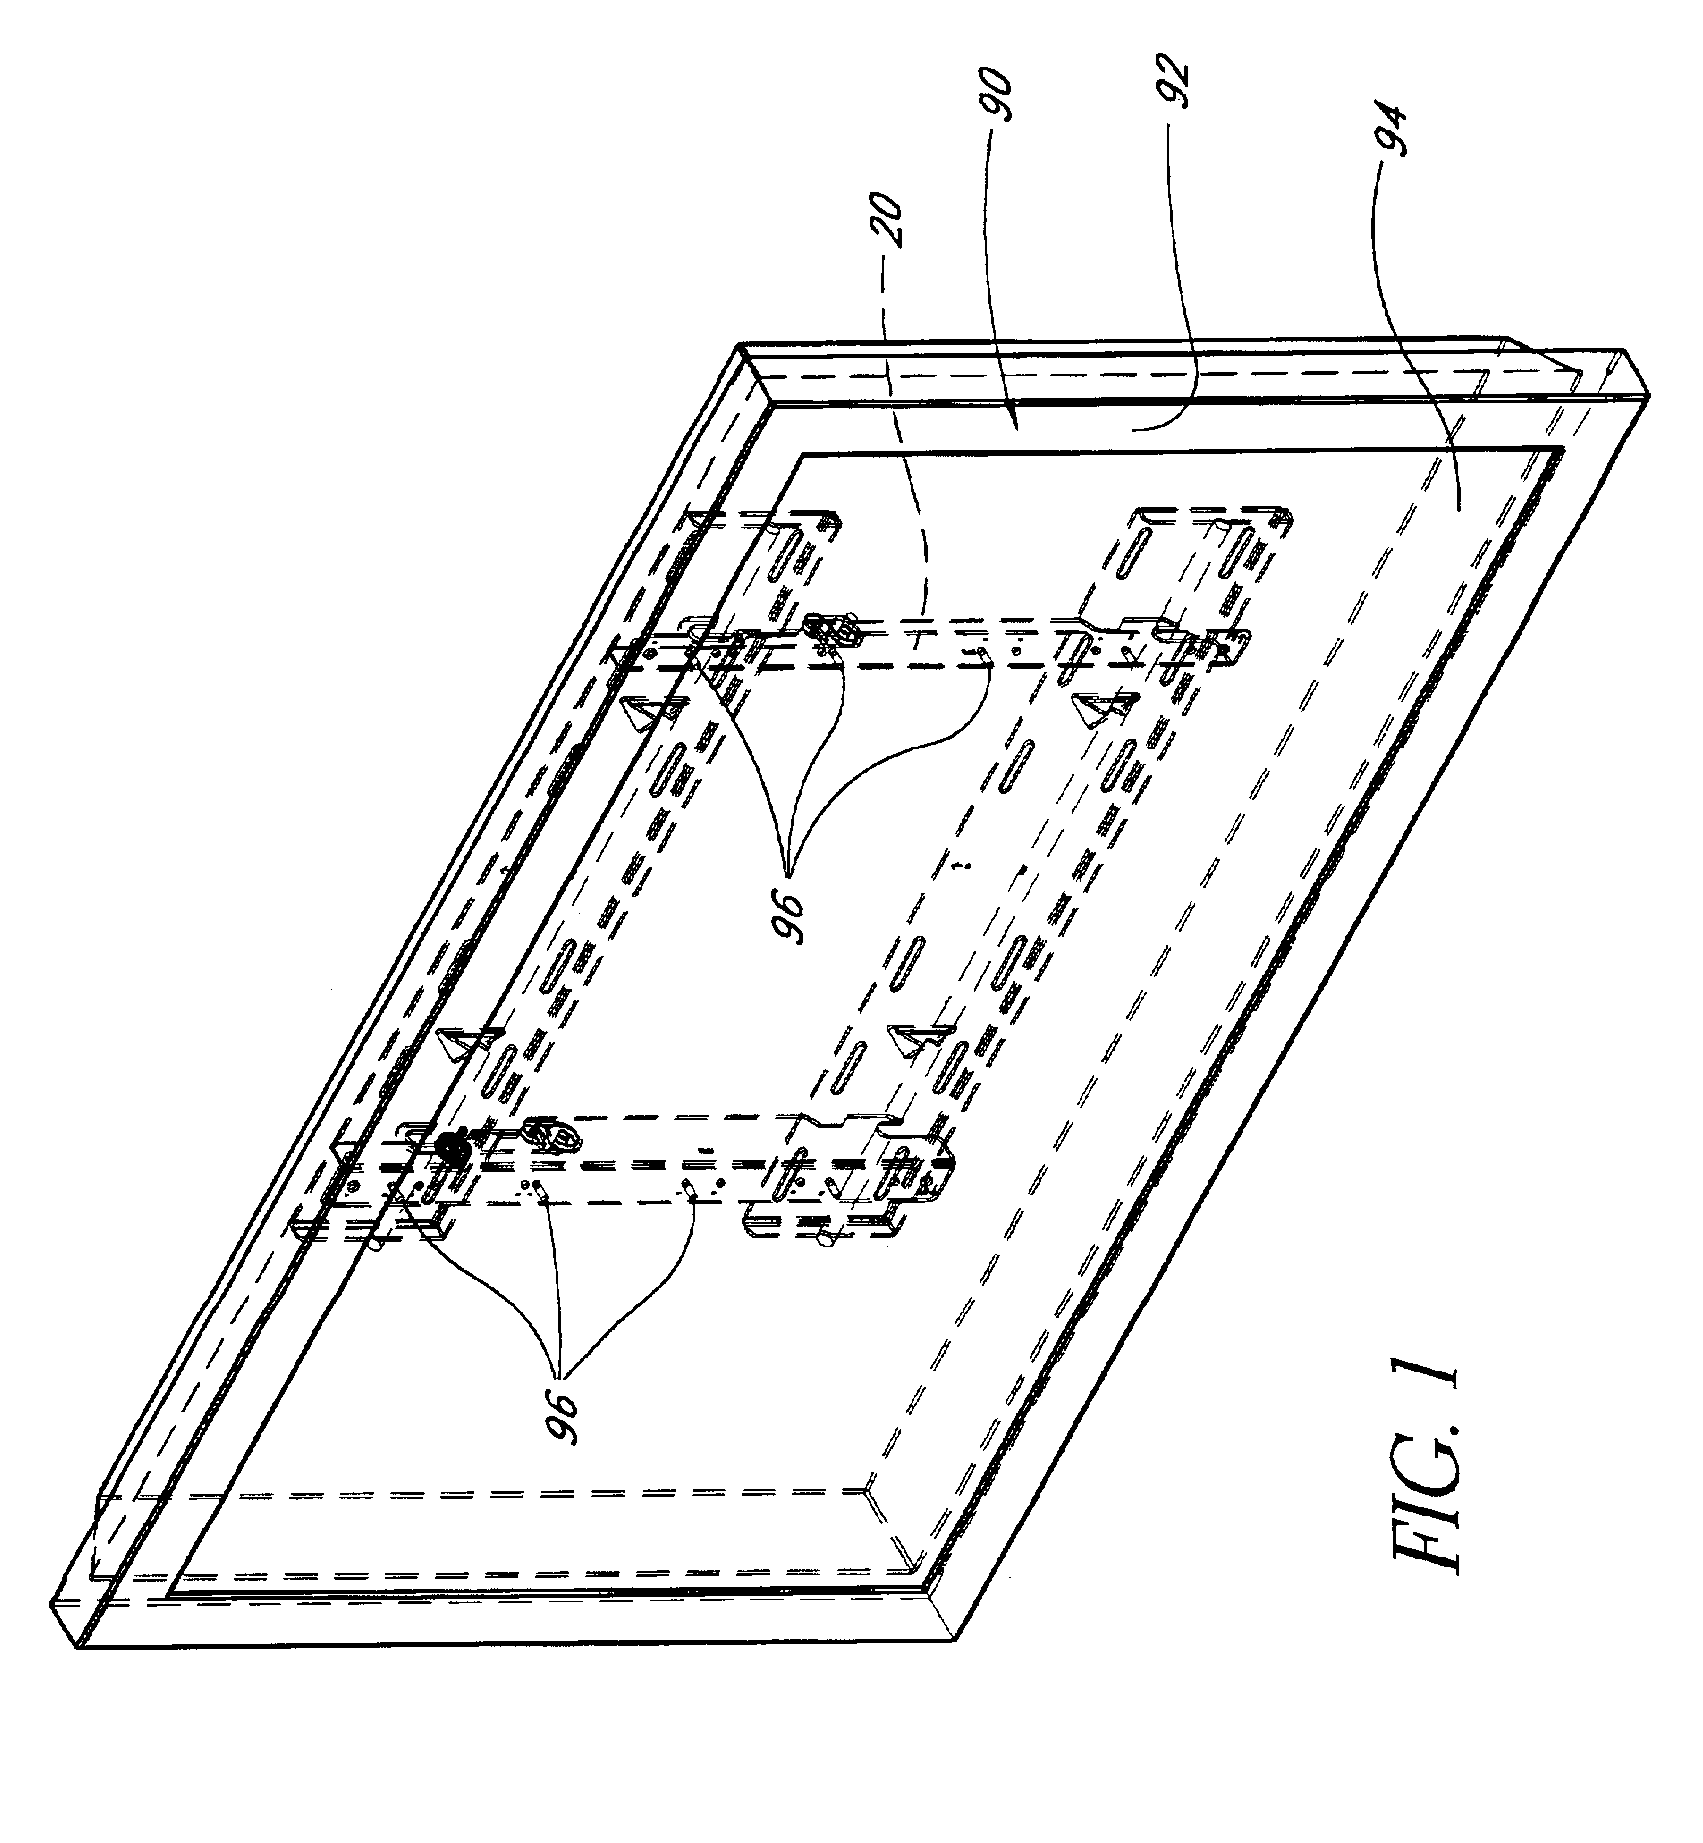 Mounting device for a flat screen display panel